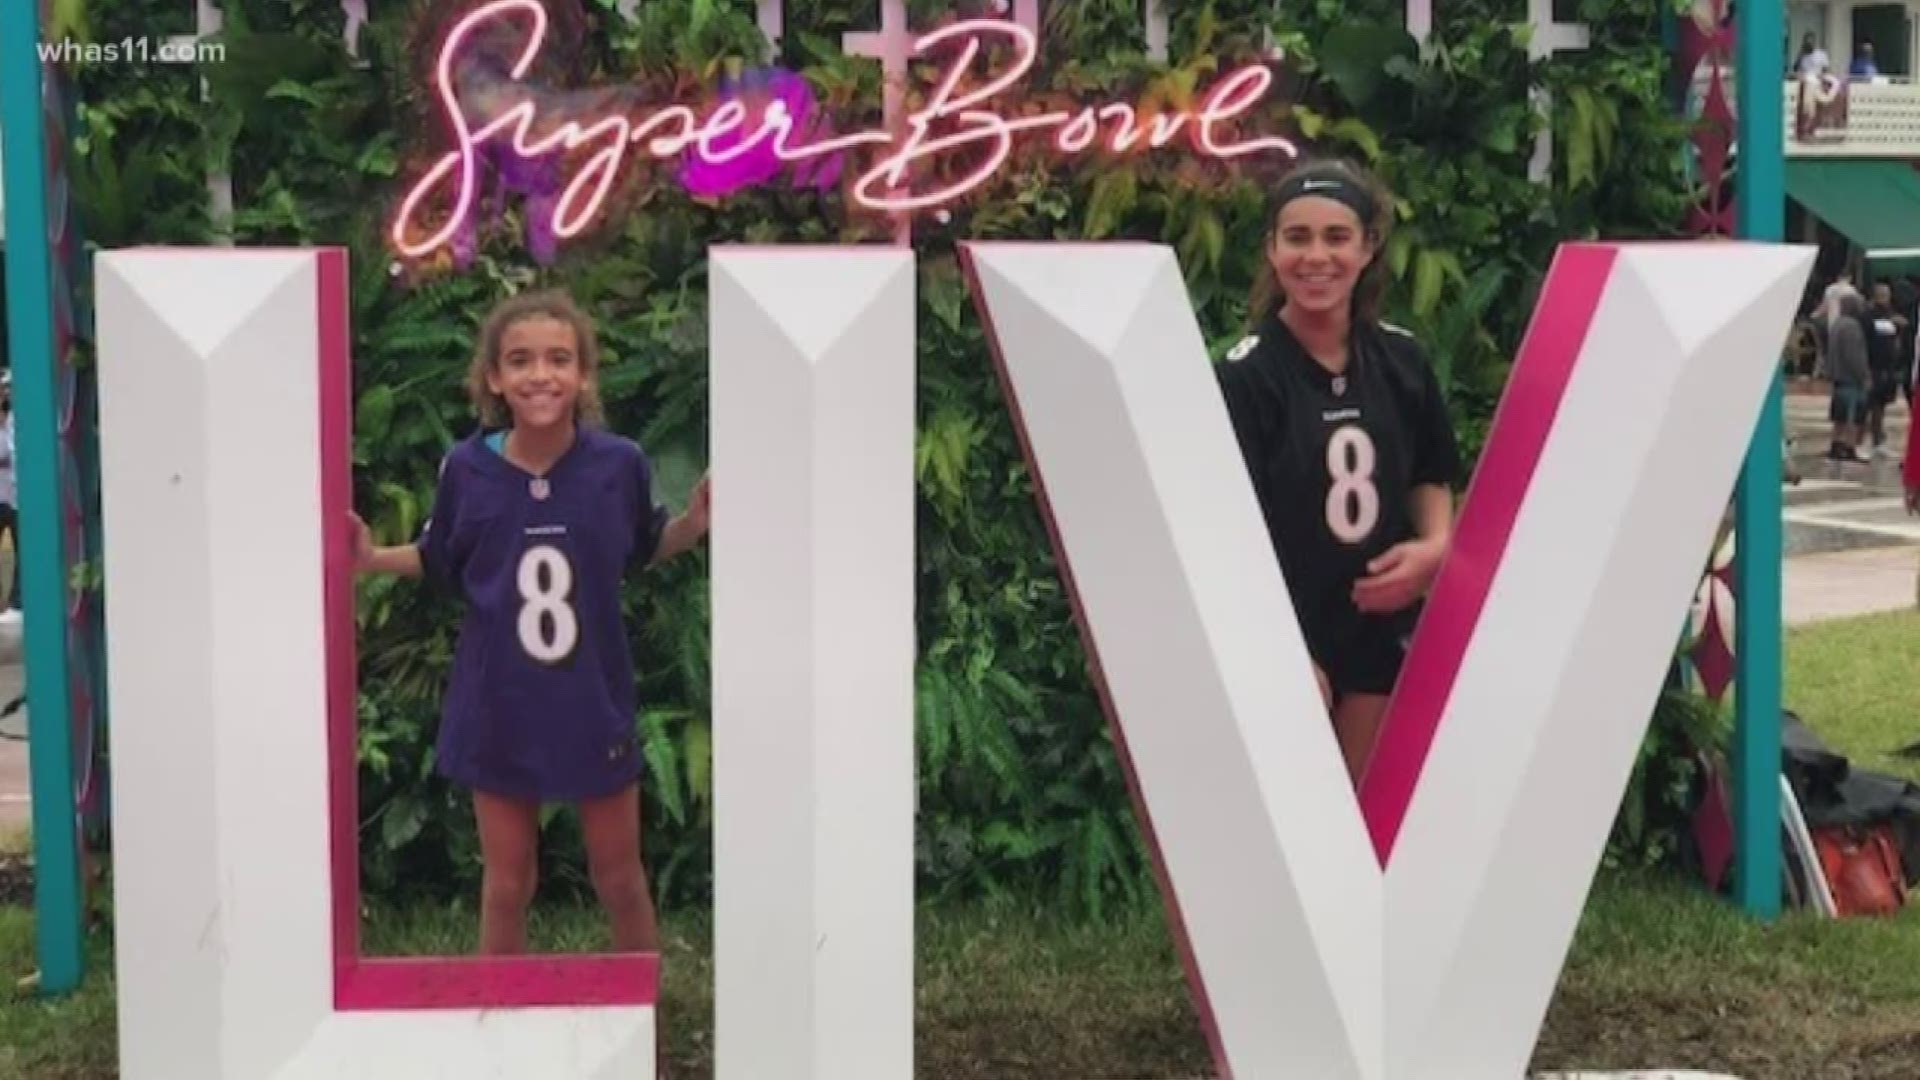 Blakely Touche was selected to represent her favorite team the Baltimore Ravens in the NFL's "Next 100" Super Bowl ad.